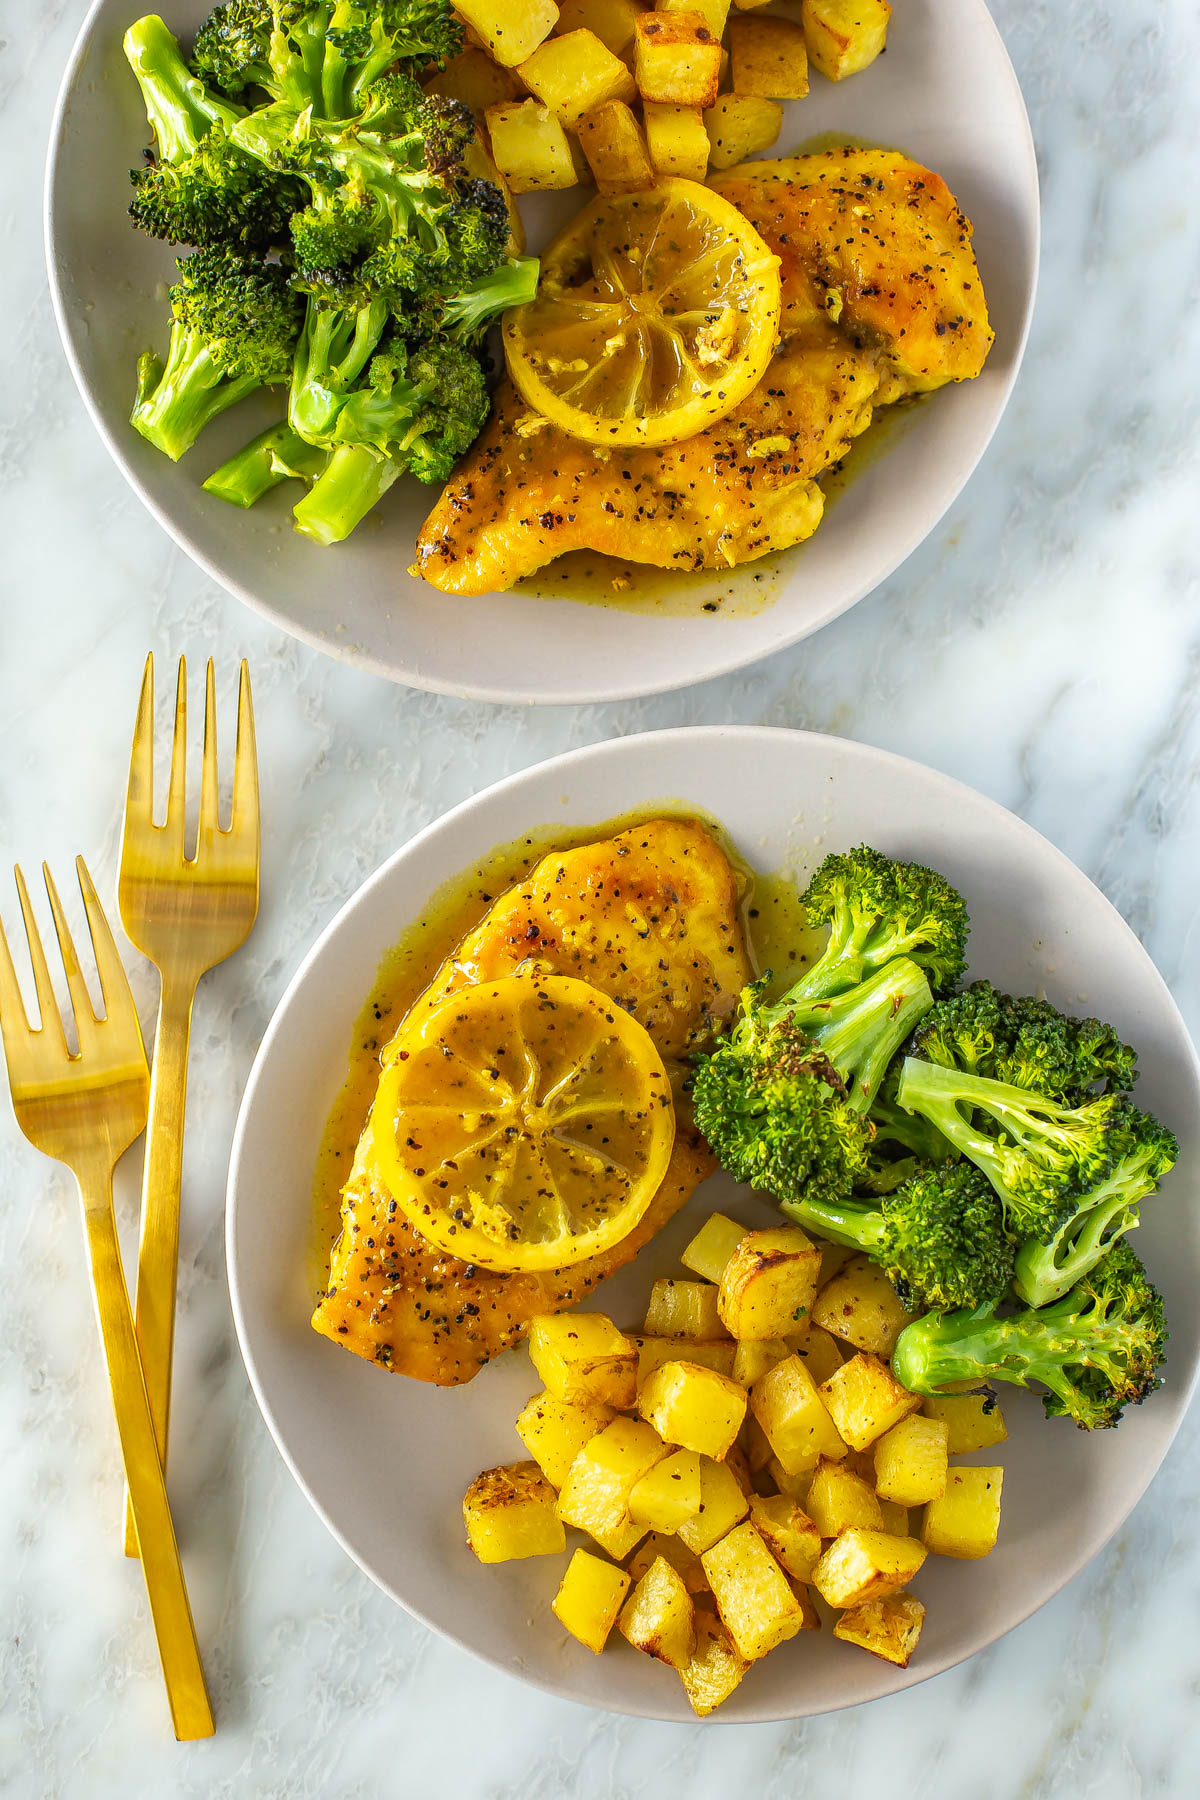 Two plates with lemon pepper chicken and a side of roasted potatoes and roasted broccoli.